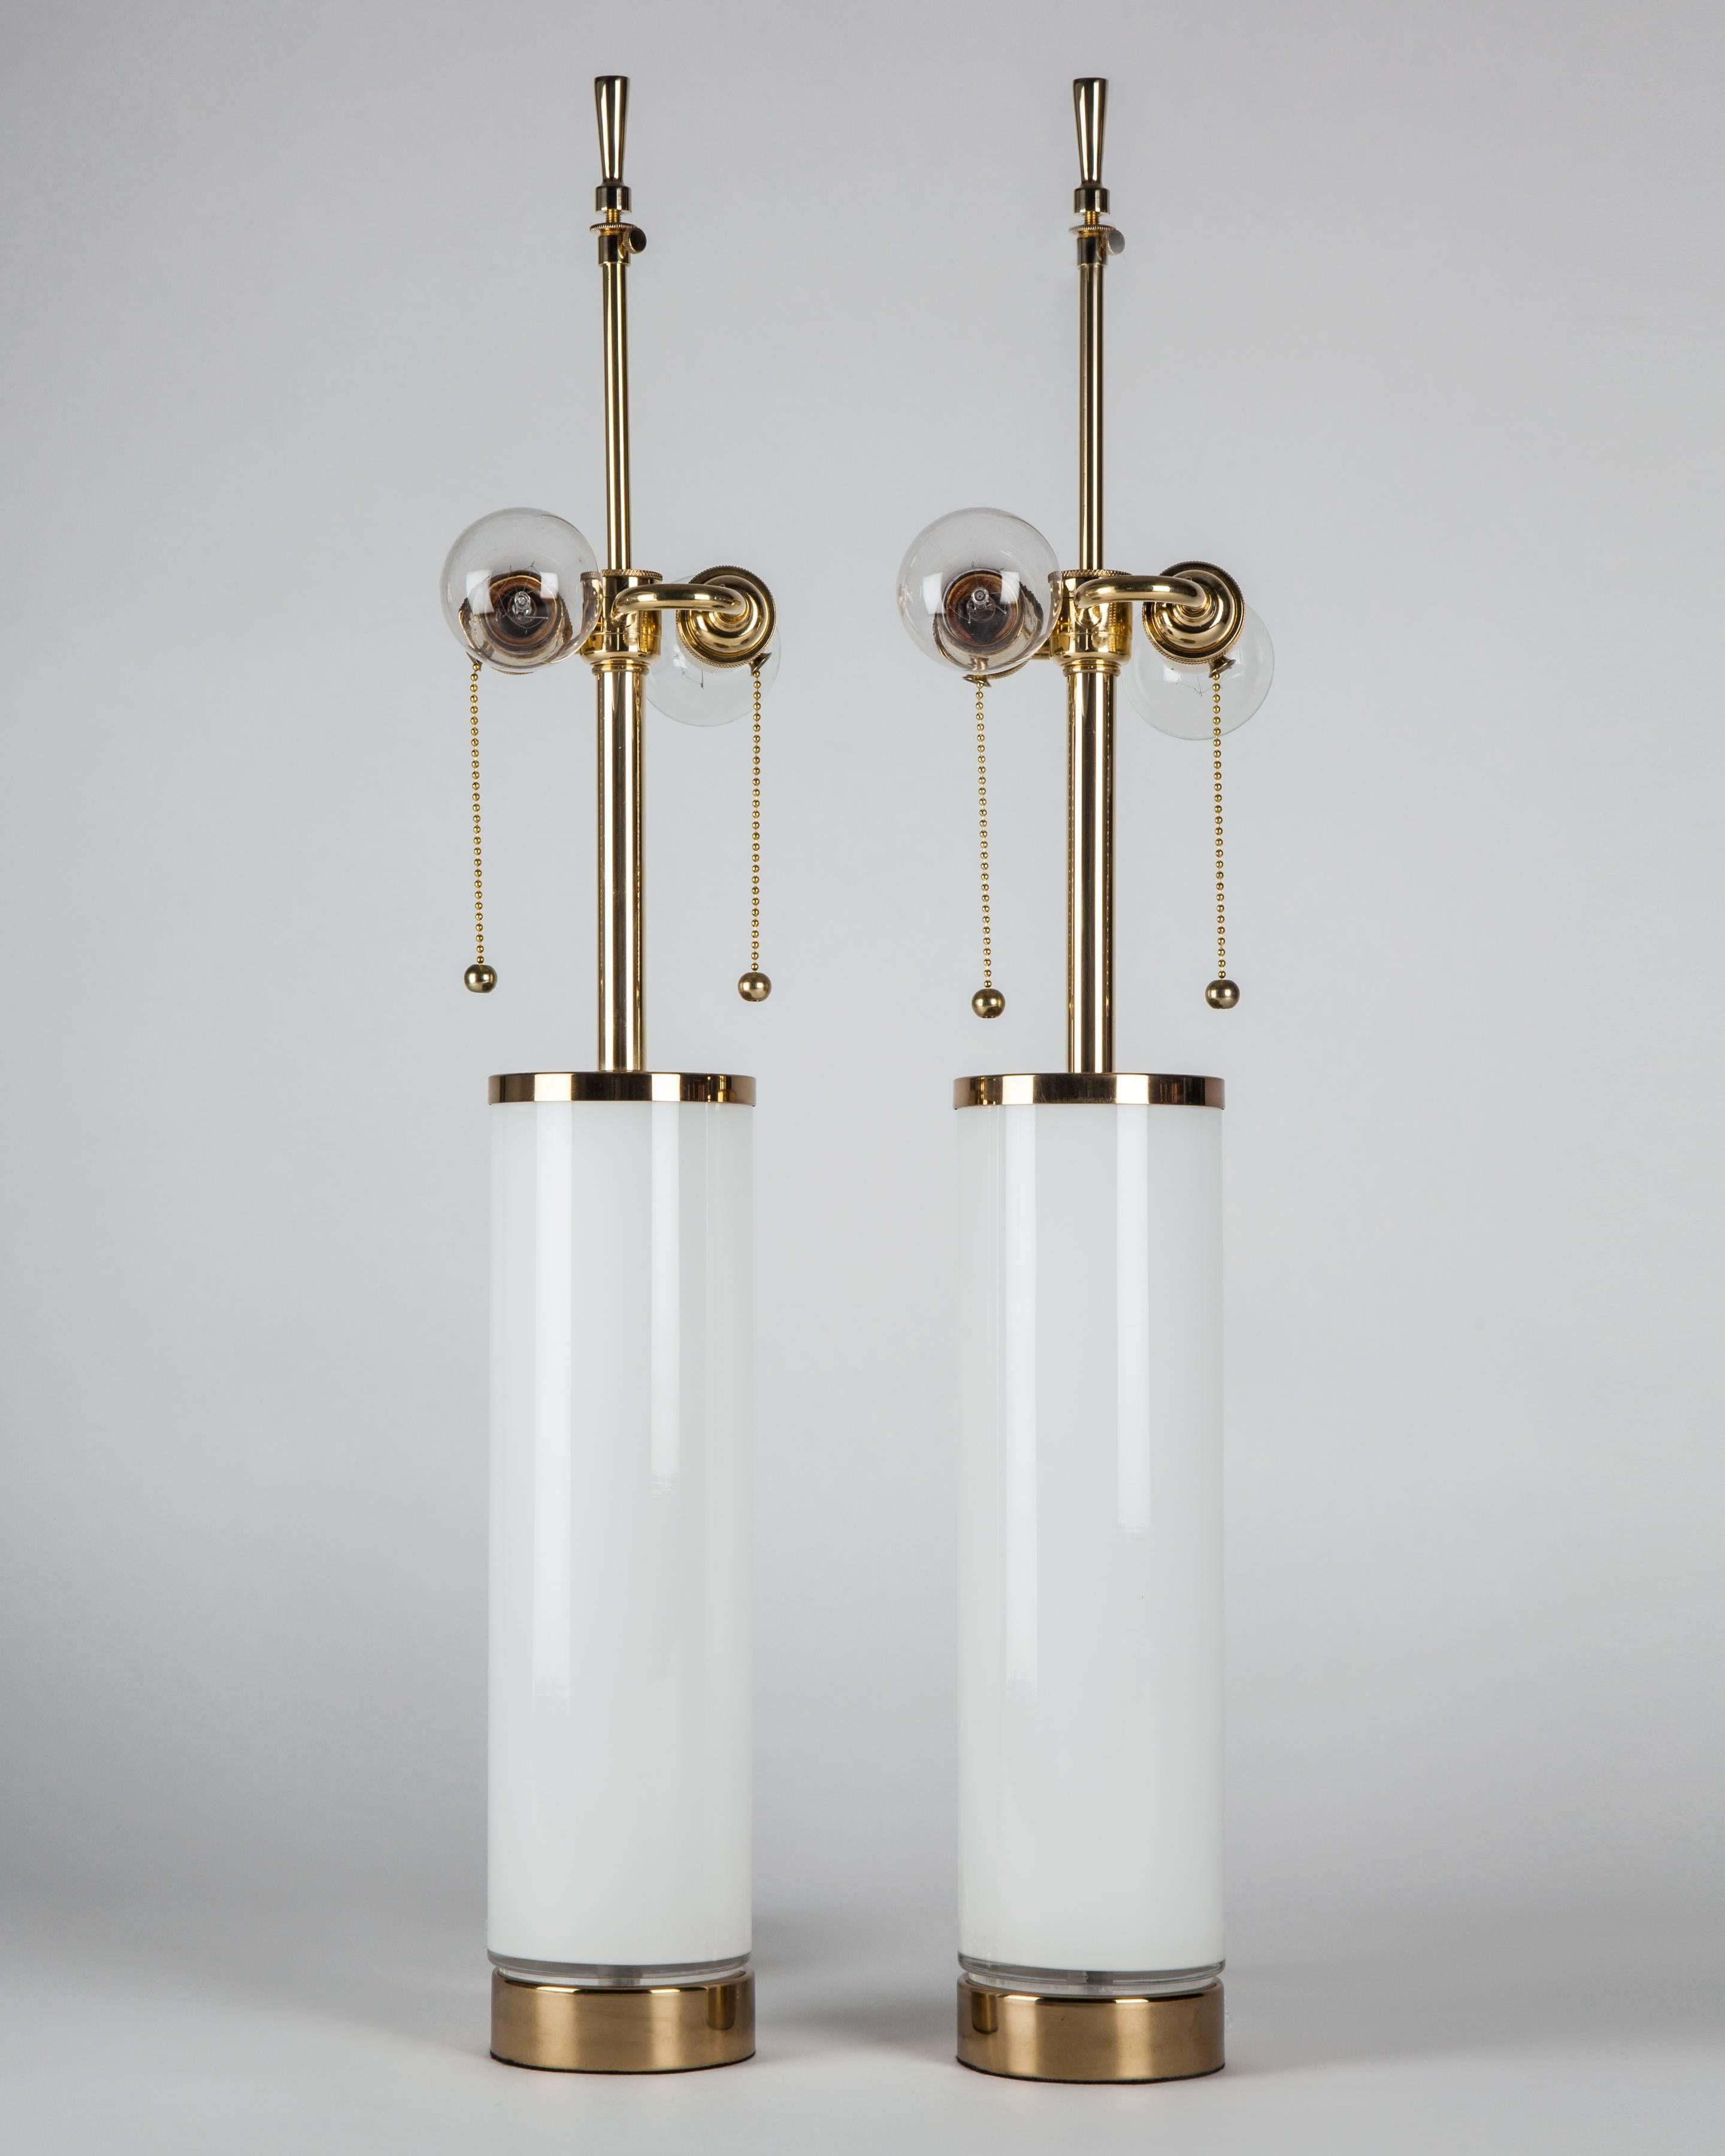 ATL1970
A pair of vintage white cased glass table lamps finished with polished brass fittings. By the Swedish maker Bergboms. Due to the antique nature of this fixture, there may be some nicks or imperfections in the glass.

Dimensions:
Overall: